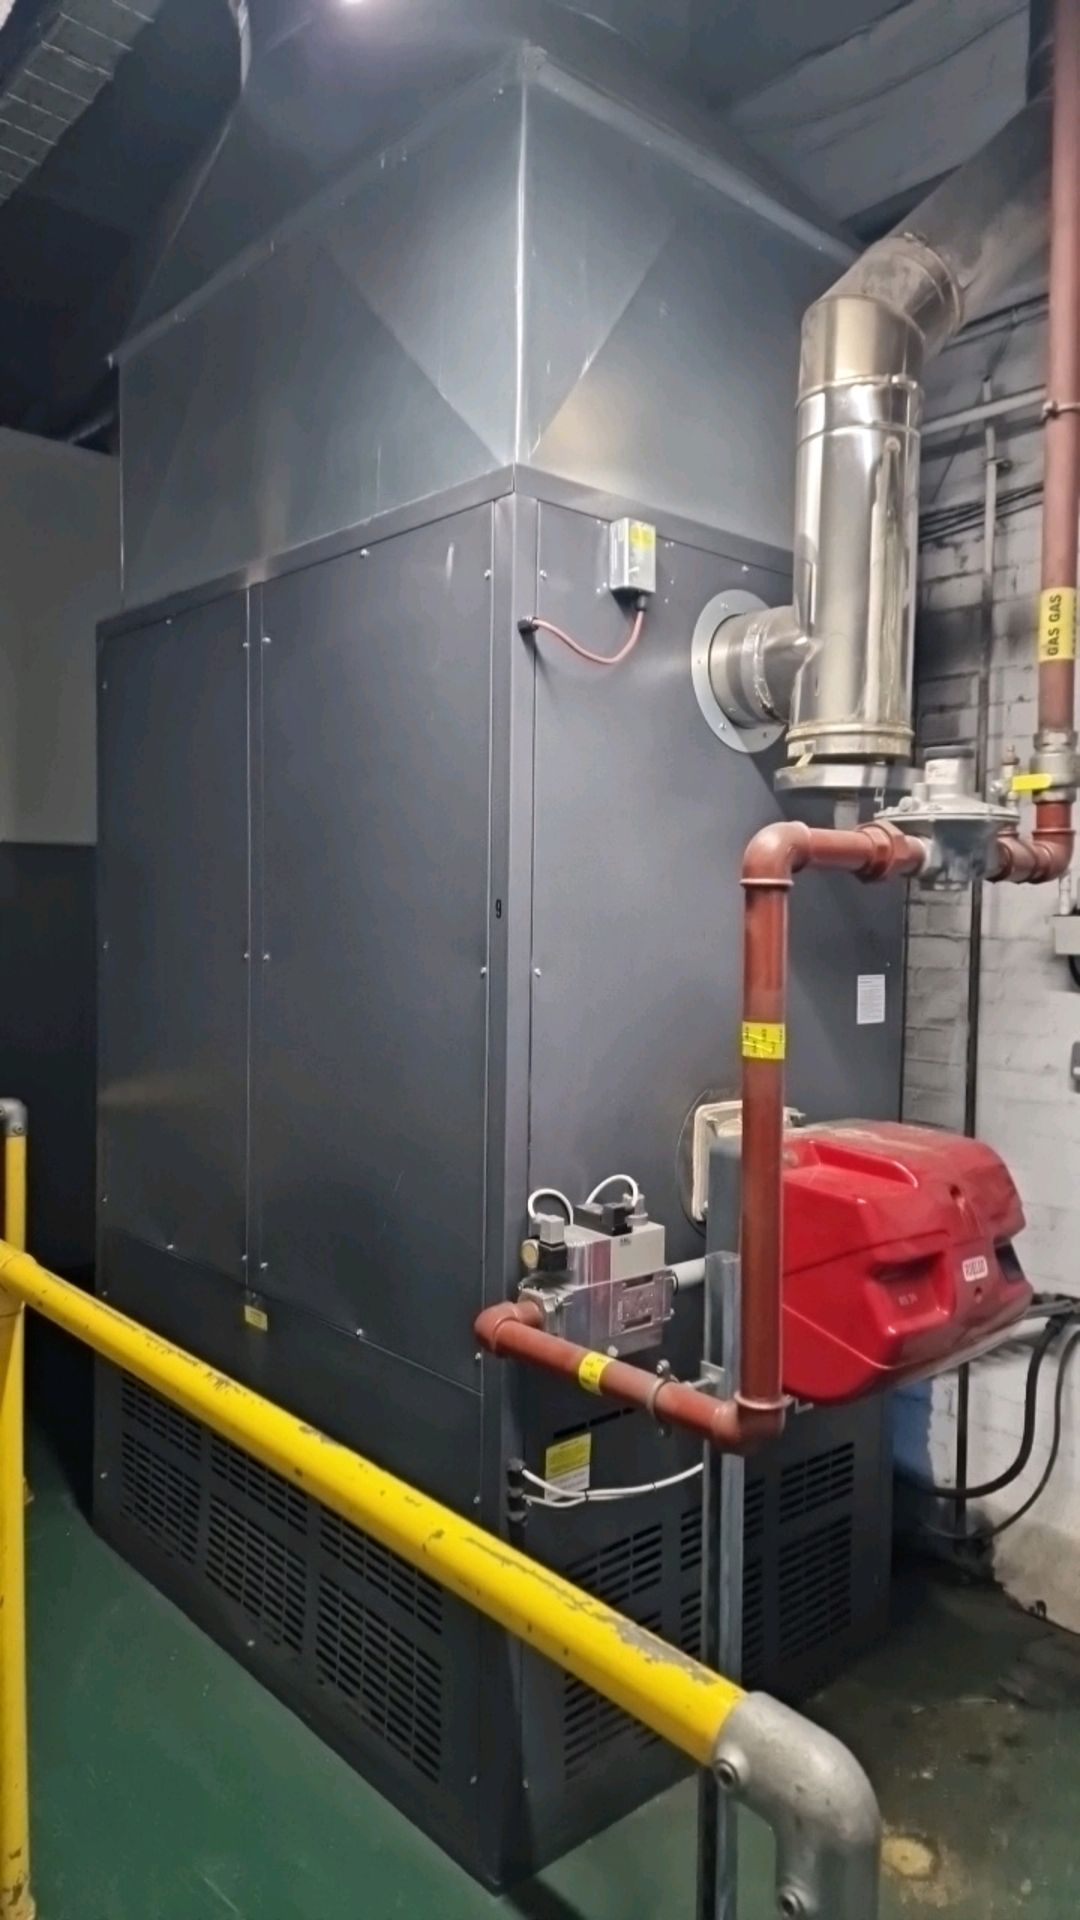 Powrmatic Industrial Heating Unit - Image 2 of 8